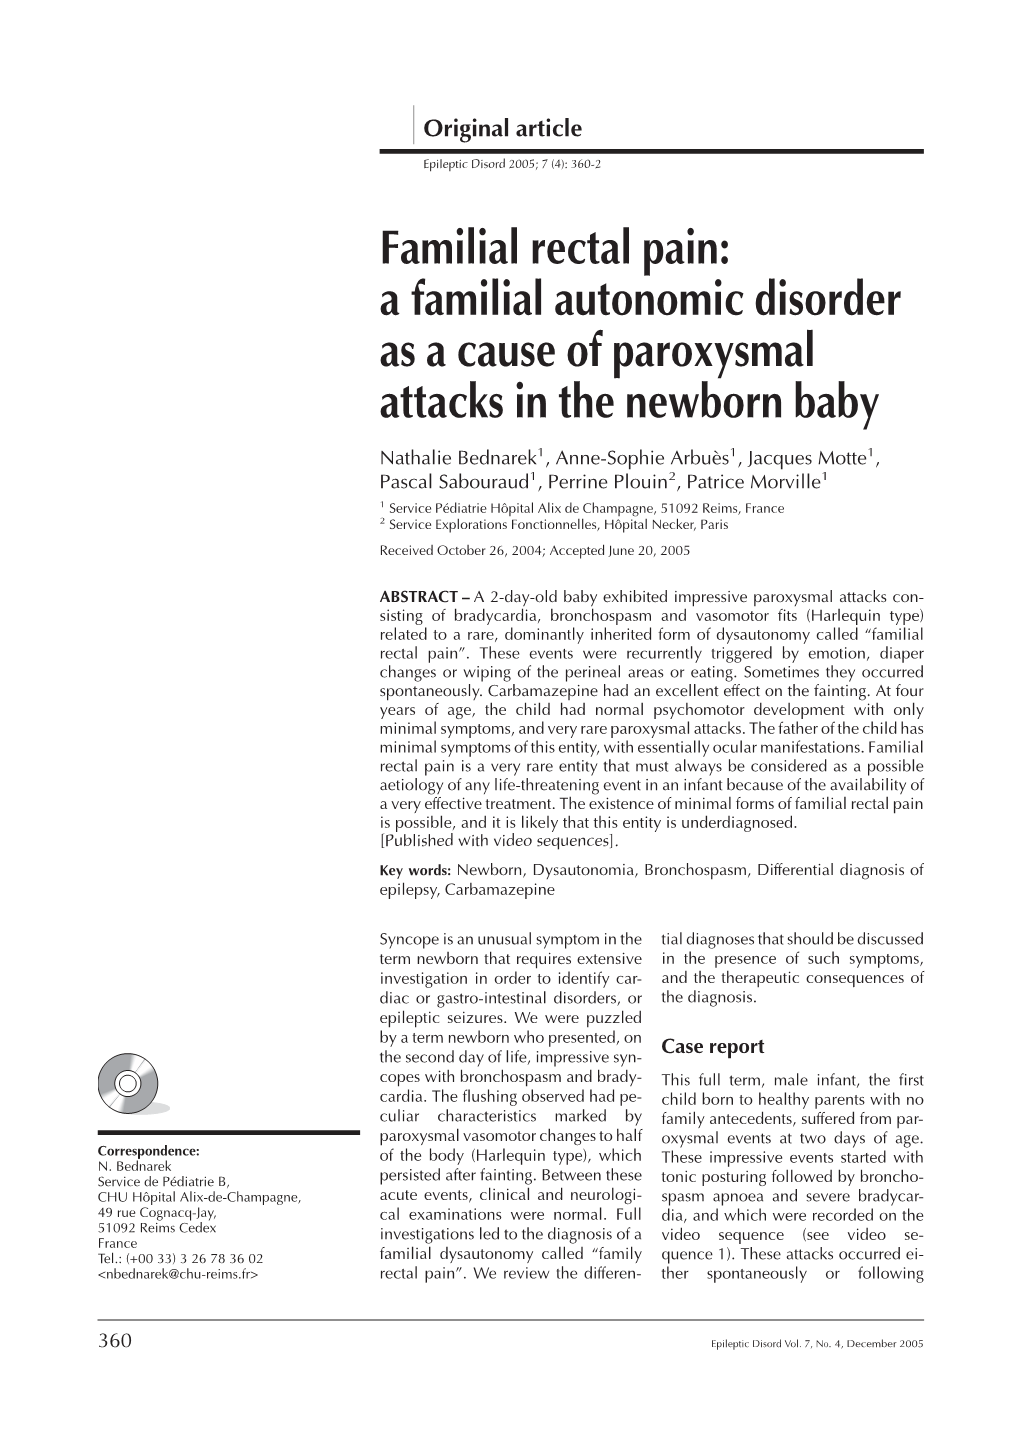 Familial Rectal Pain: a Familial Autonomic Disorder As a Cause of Paroxysmal Attacks in the Newborn Baby